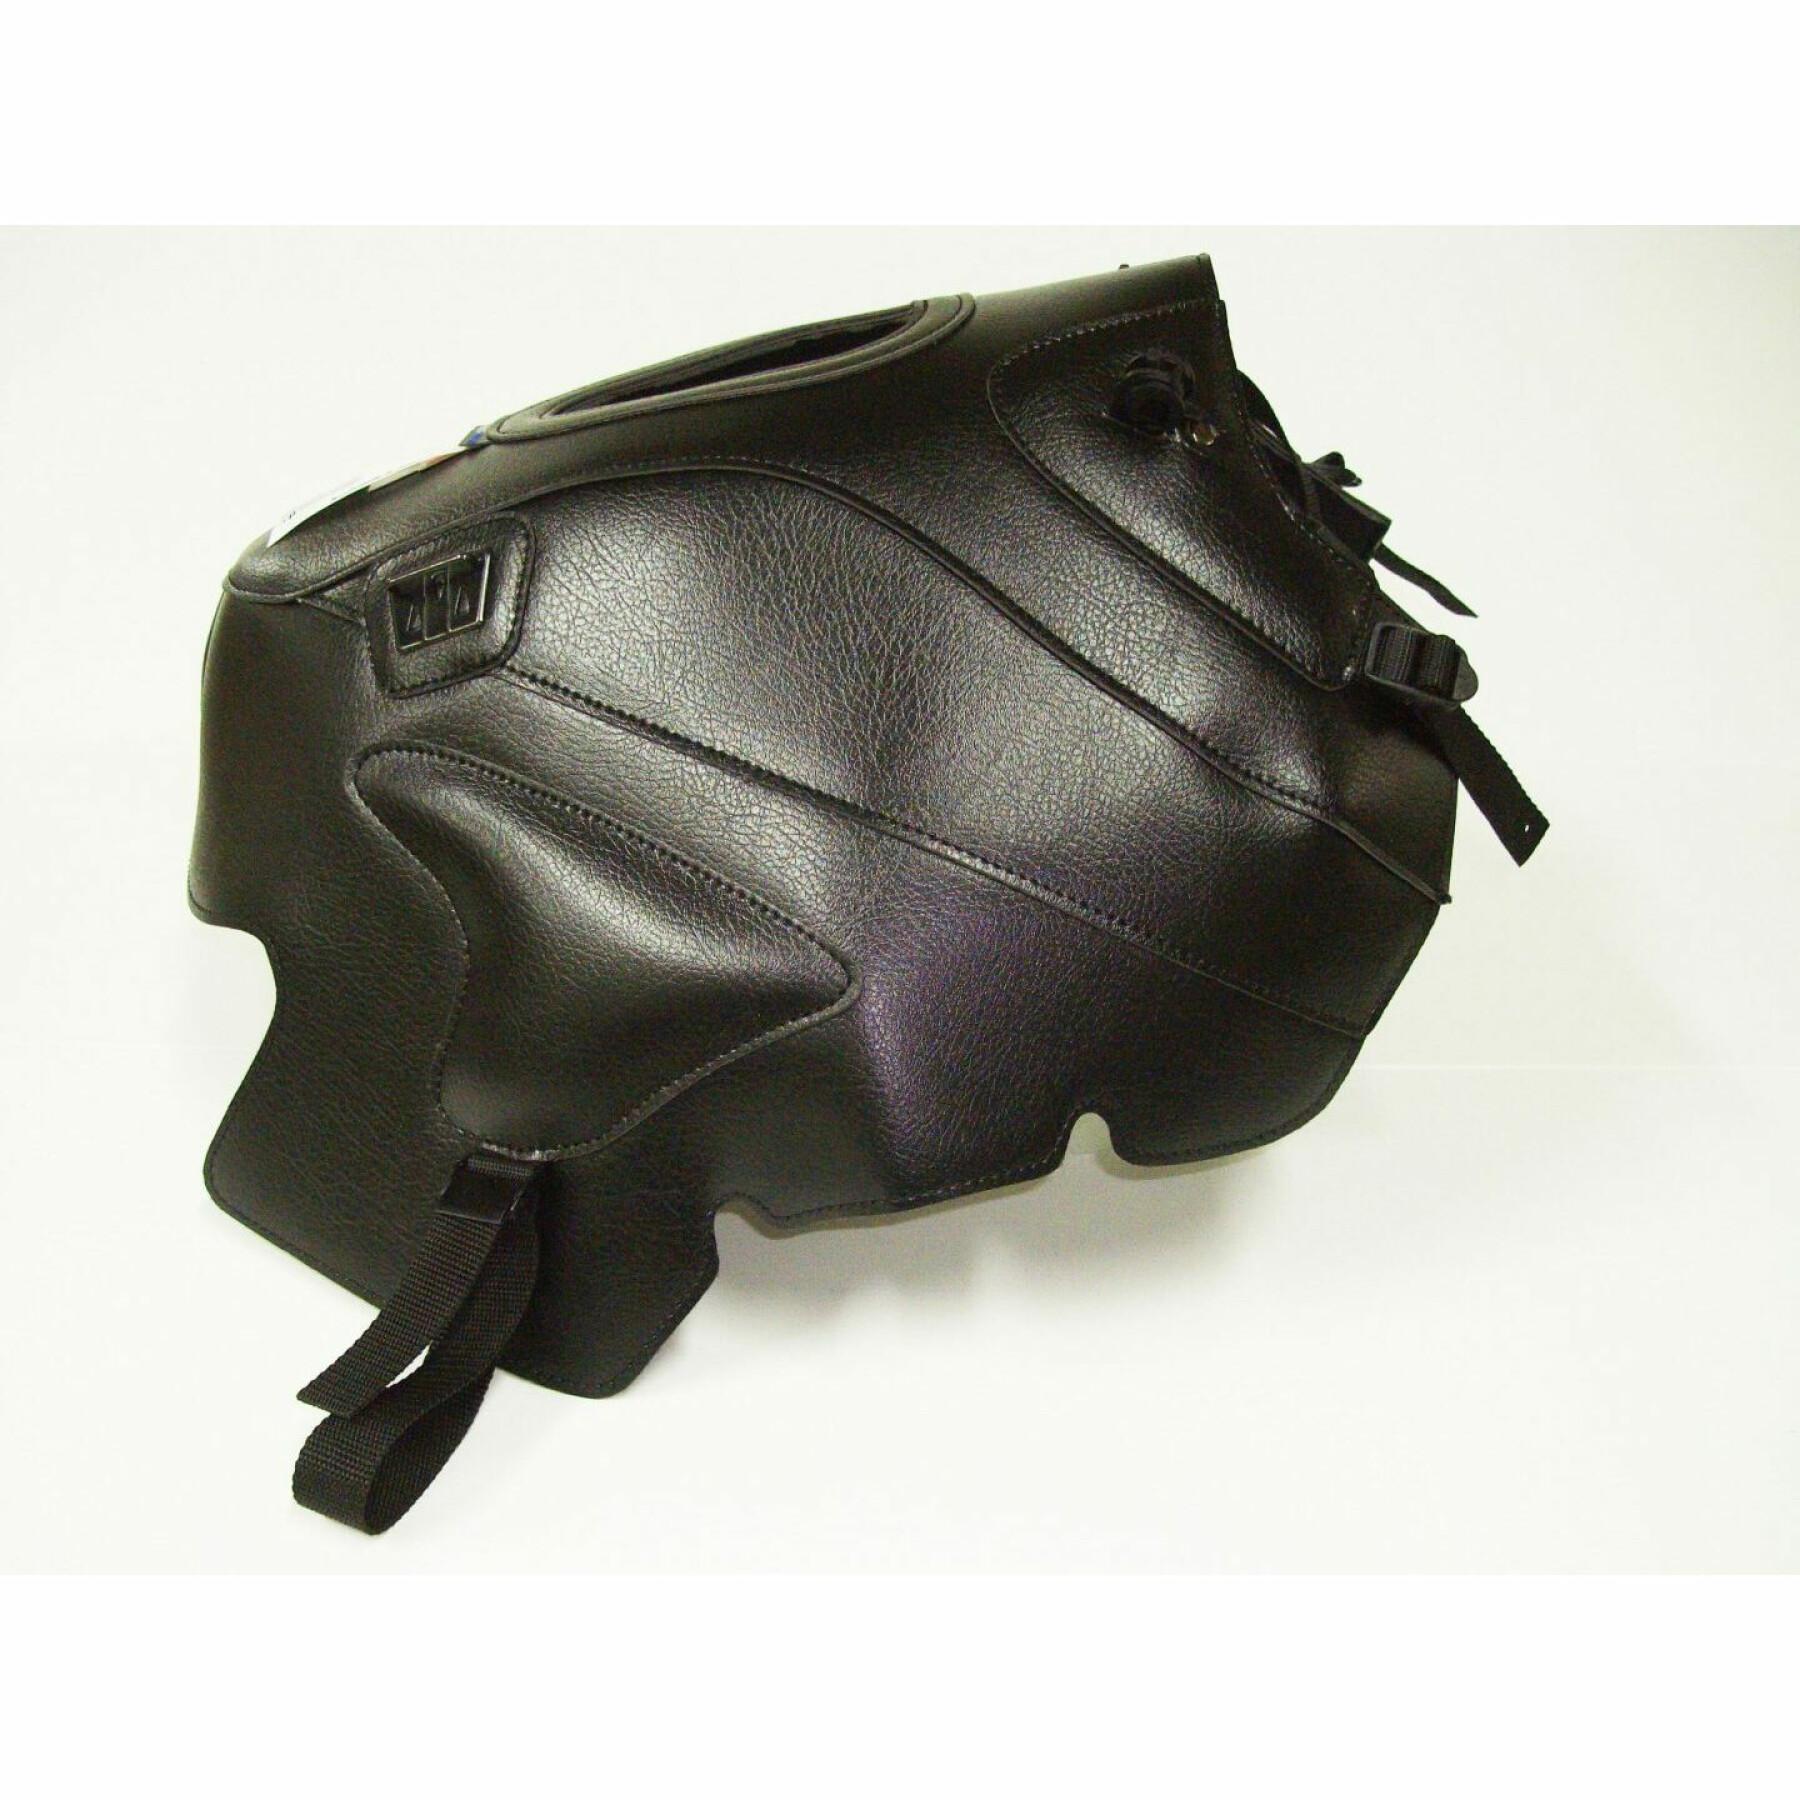 Motorcycle tank cover Bagster multistrada 620/1000/1100